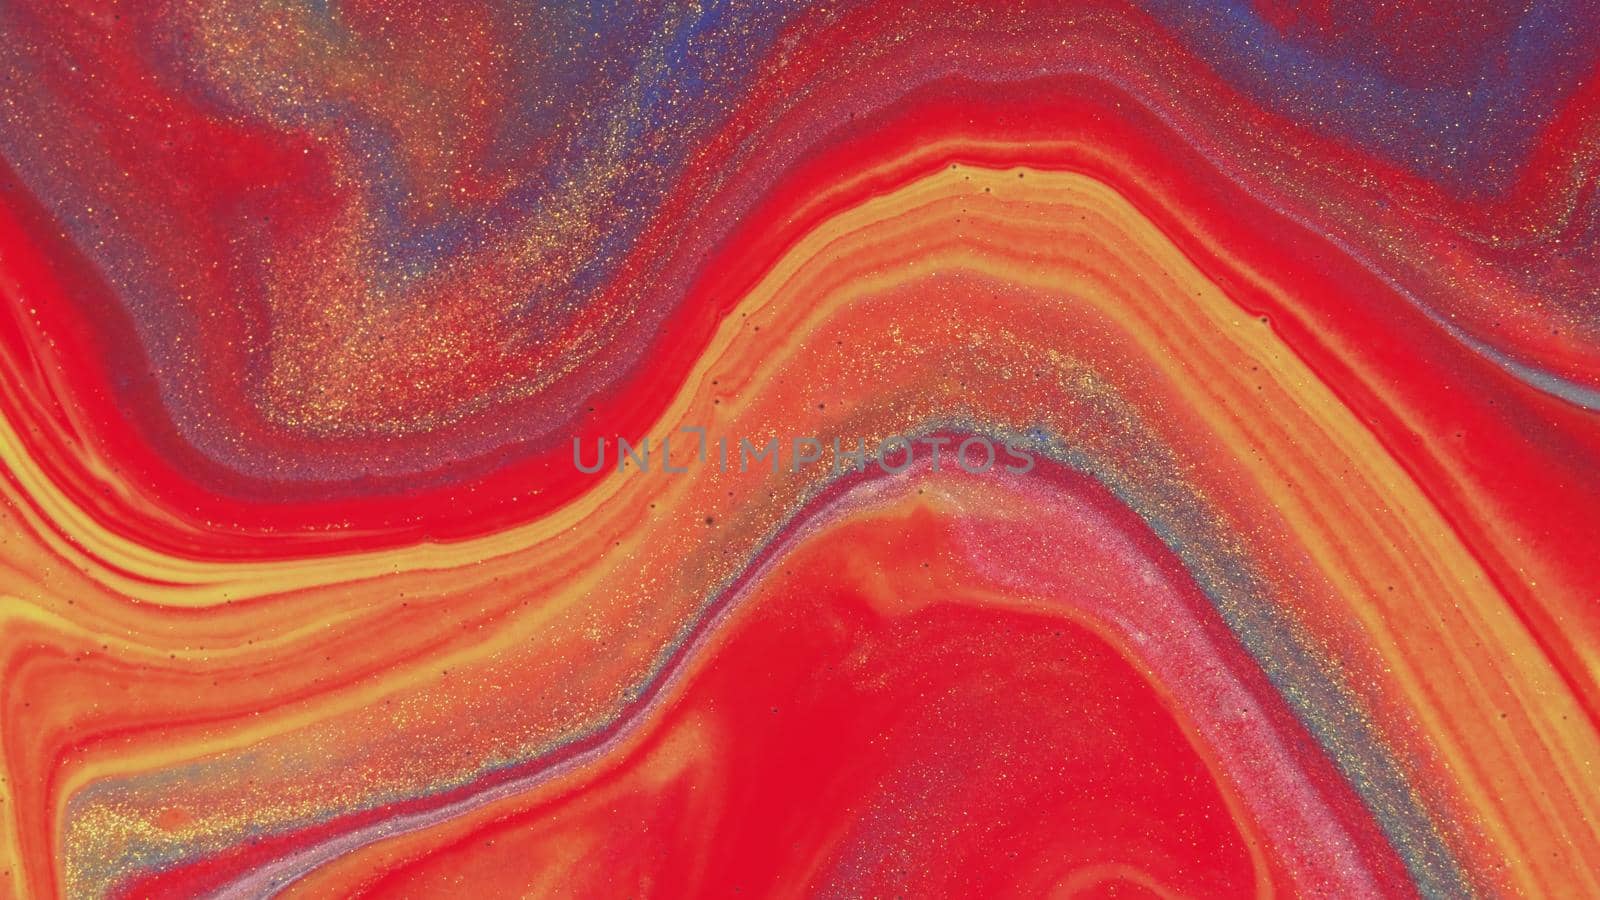 Abstract colorful background of spreading colors. Abstract red paint background. Acrylic texture with marble pattern. Abstract-ART. Natural luxury. The style includes the vortices of marble or the ripples. Very beautiful red, black, yellow, gray, blue paint with the addition of gold powder.